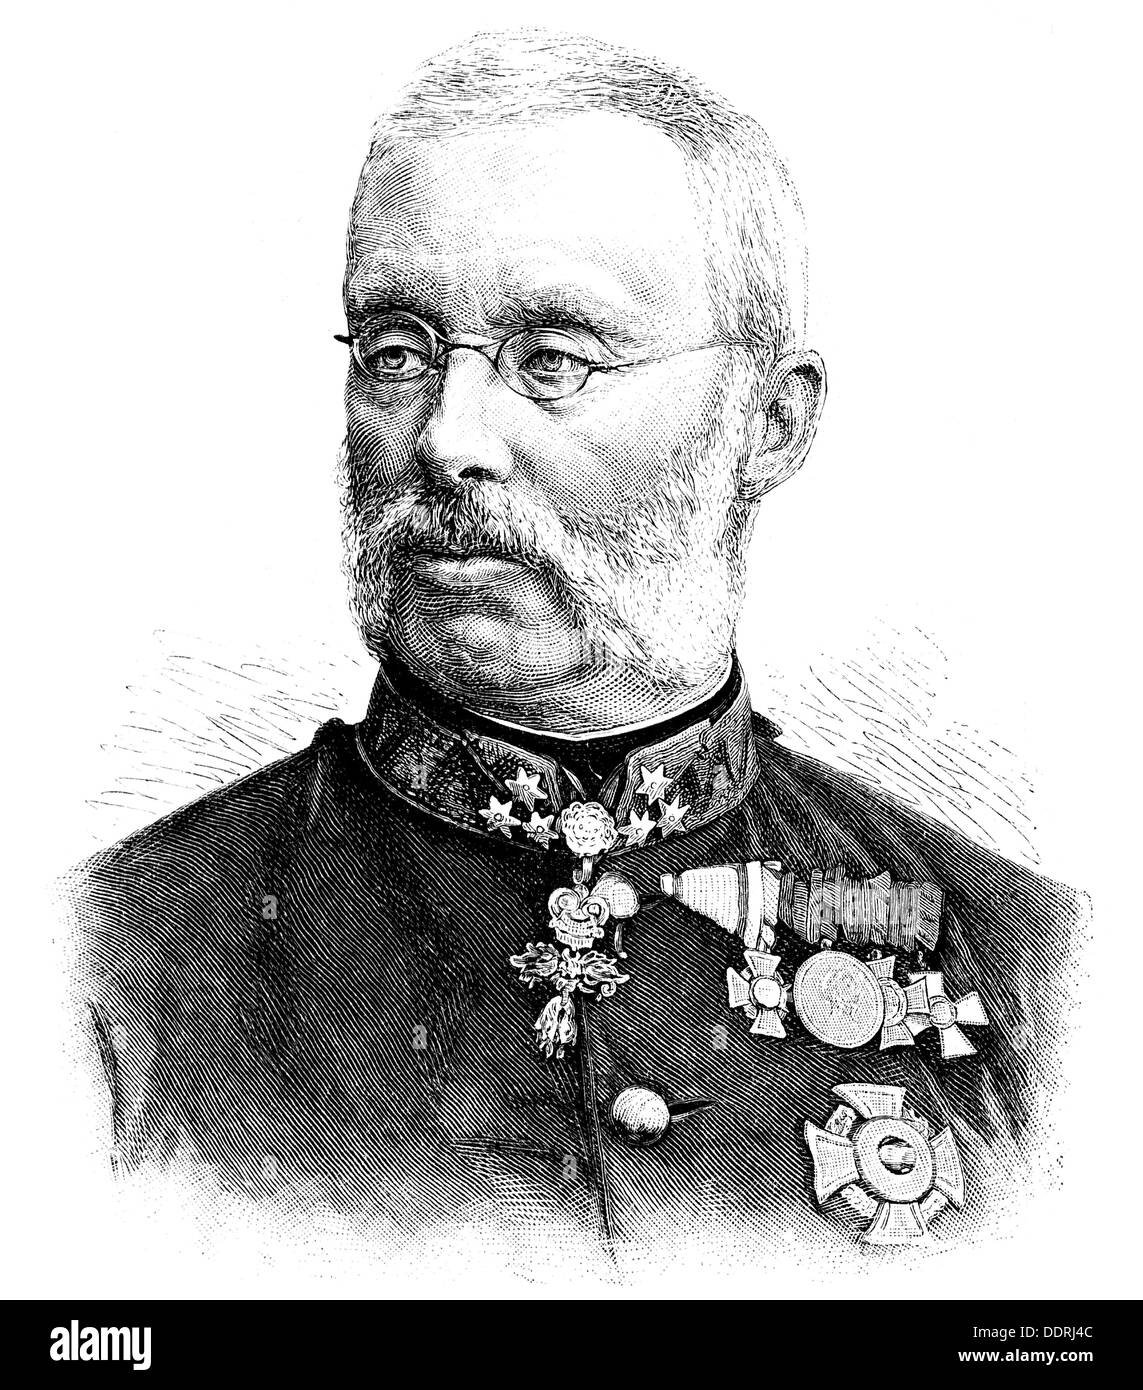 Albrecht, 3.8.1817 - 18.2.1895, Archduke of Austria, Austrian general, inspector general of the Austro-Hungarian Army 1868 - 1895, portrait, wood engraving, circa 1890, Stock Photo